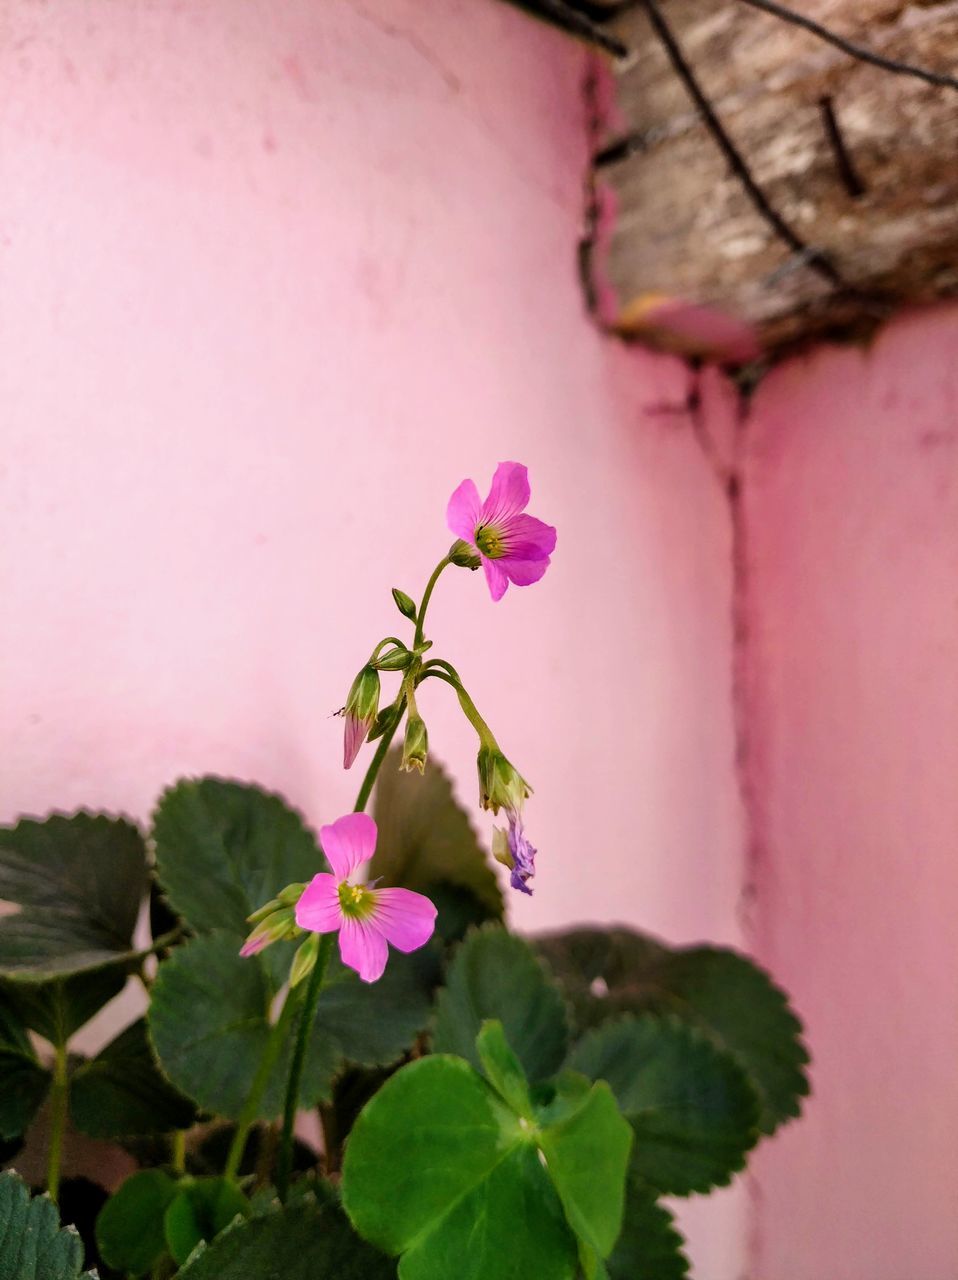 plant, pink color, flower, flowering plant, vulnerability, fragility, freshness, beauty in nature, close-up, growth, plant part, leaf, petal, nature, flower head, no people, inflorescence, day, focus on foreground, wall - building feature, outdoors